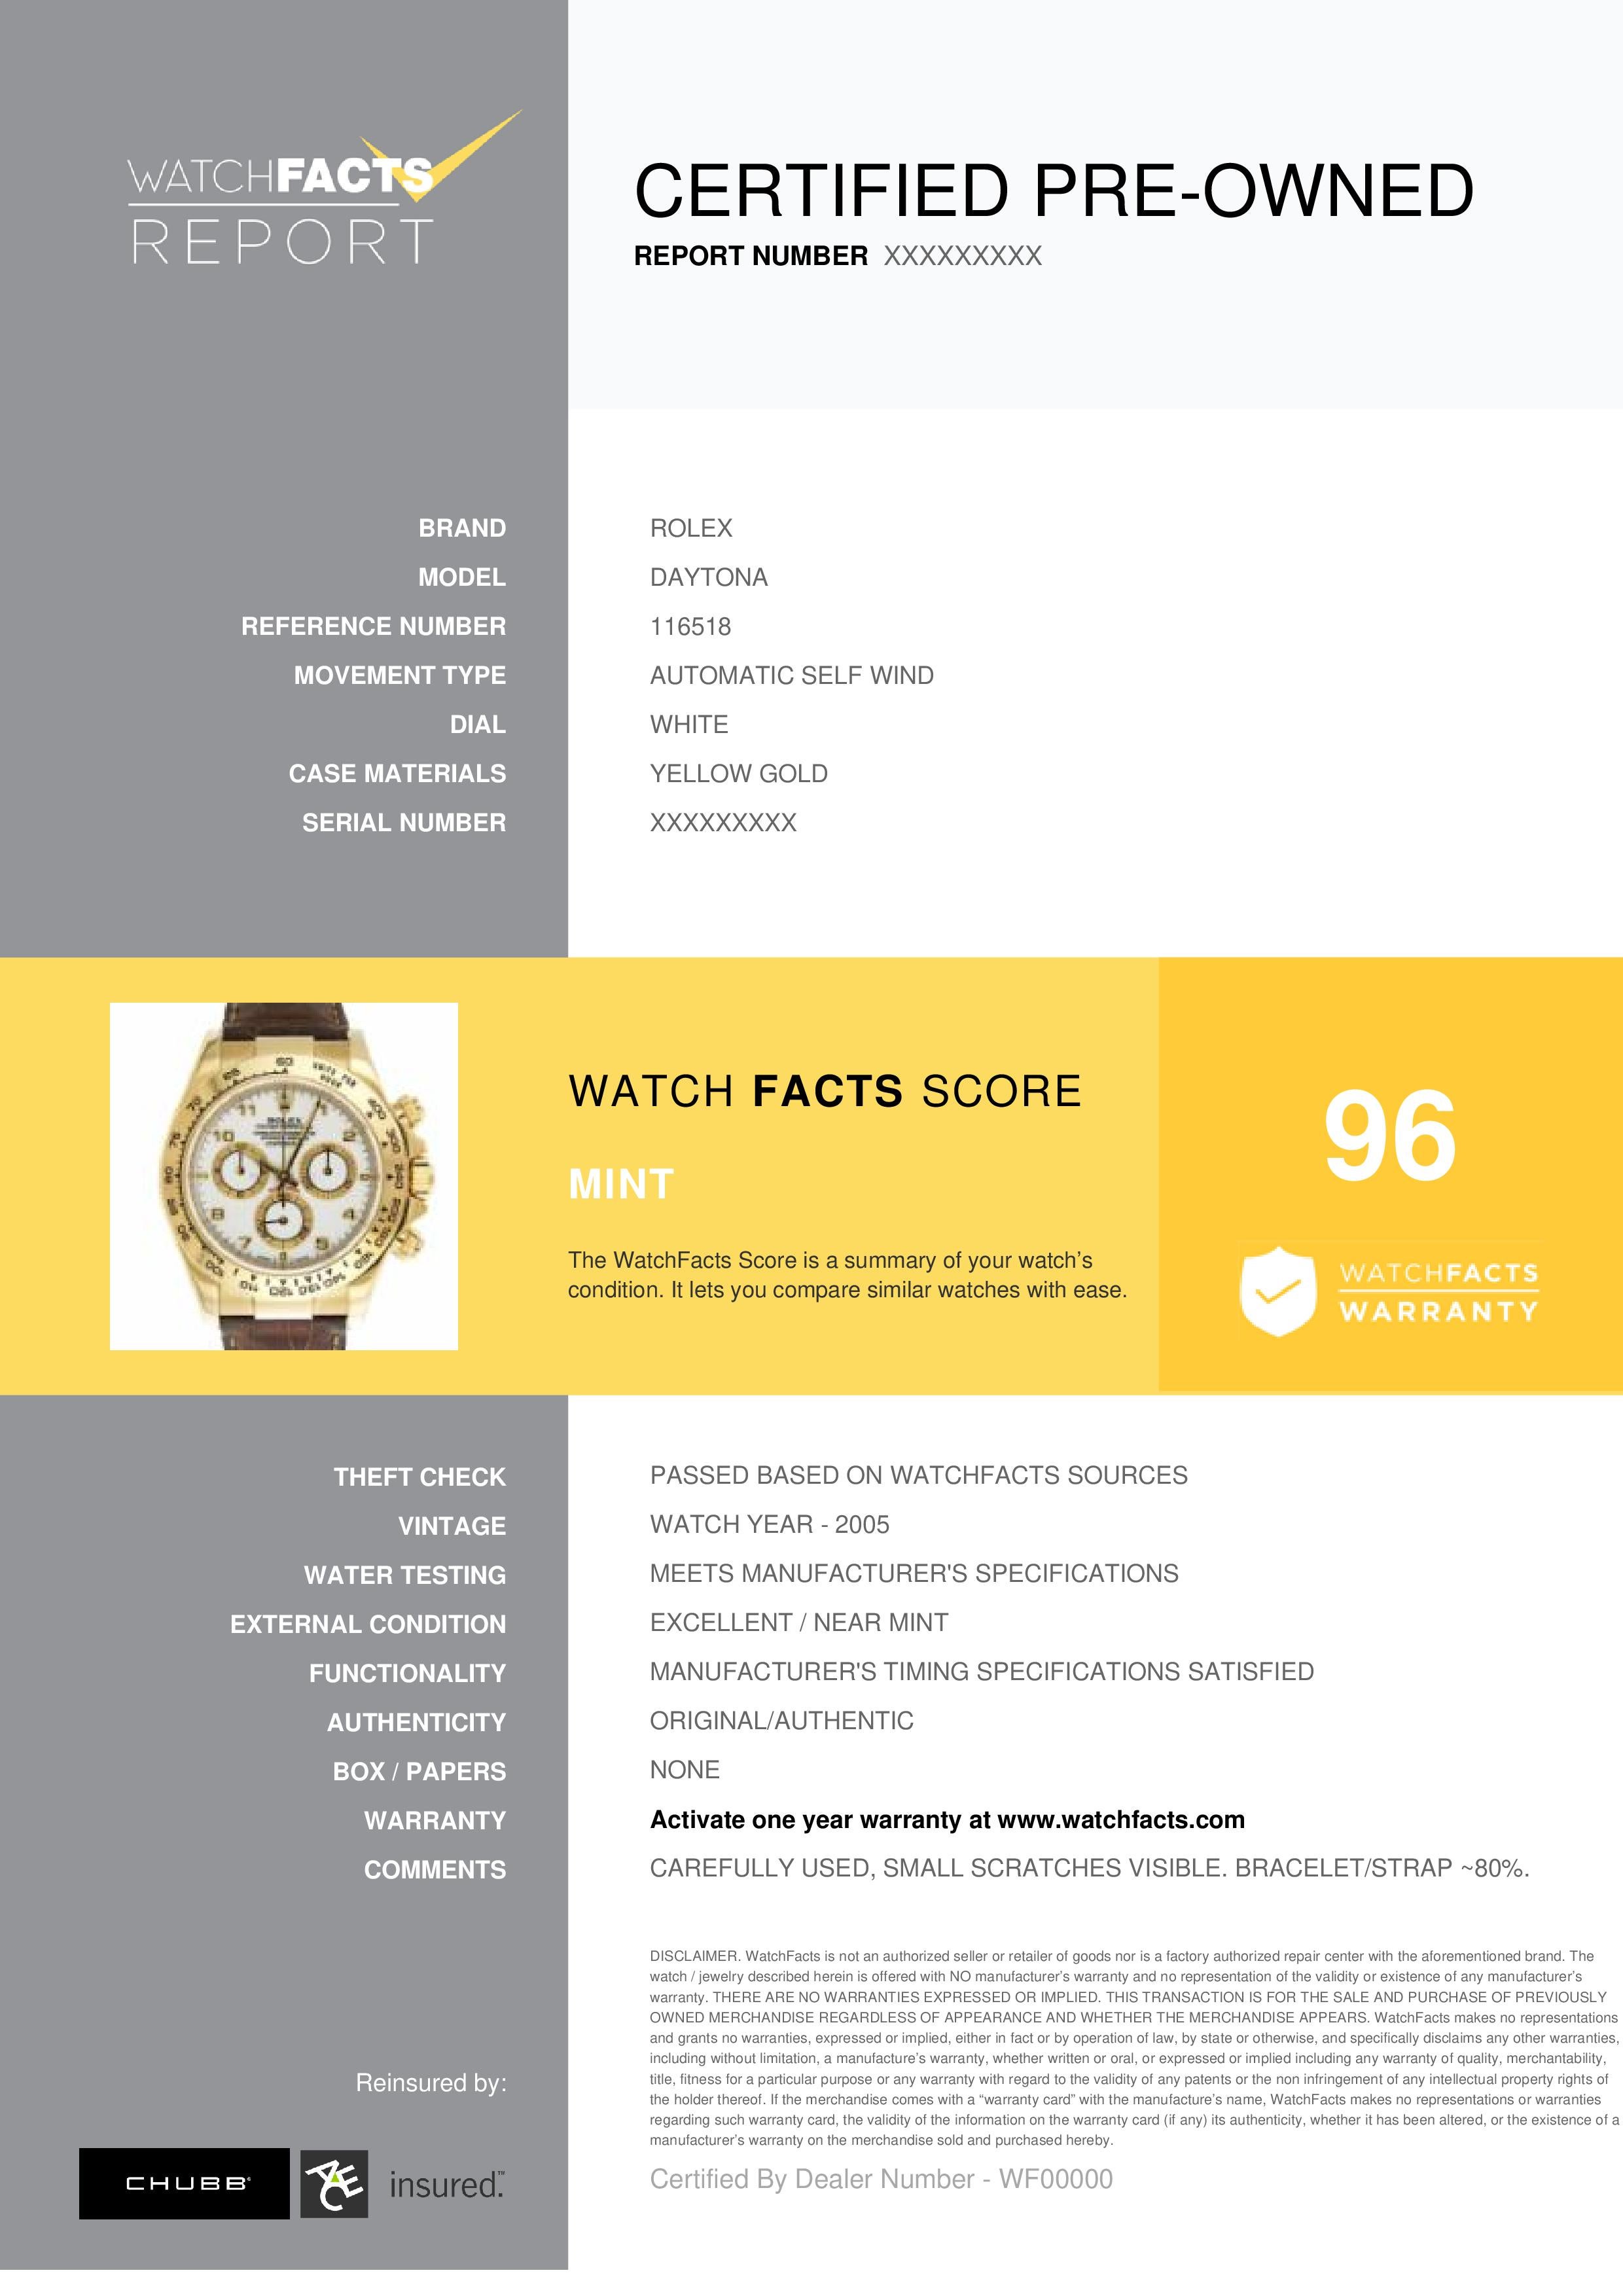 Rolex Daytona Reference #:116518. men's yellow gold, Rolex, Cosmograph Daytona 116518, automatic self wind. Verified and Certified by WatchFacts. 1 year warranty offered by WatchFacts.